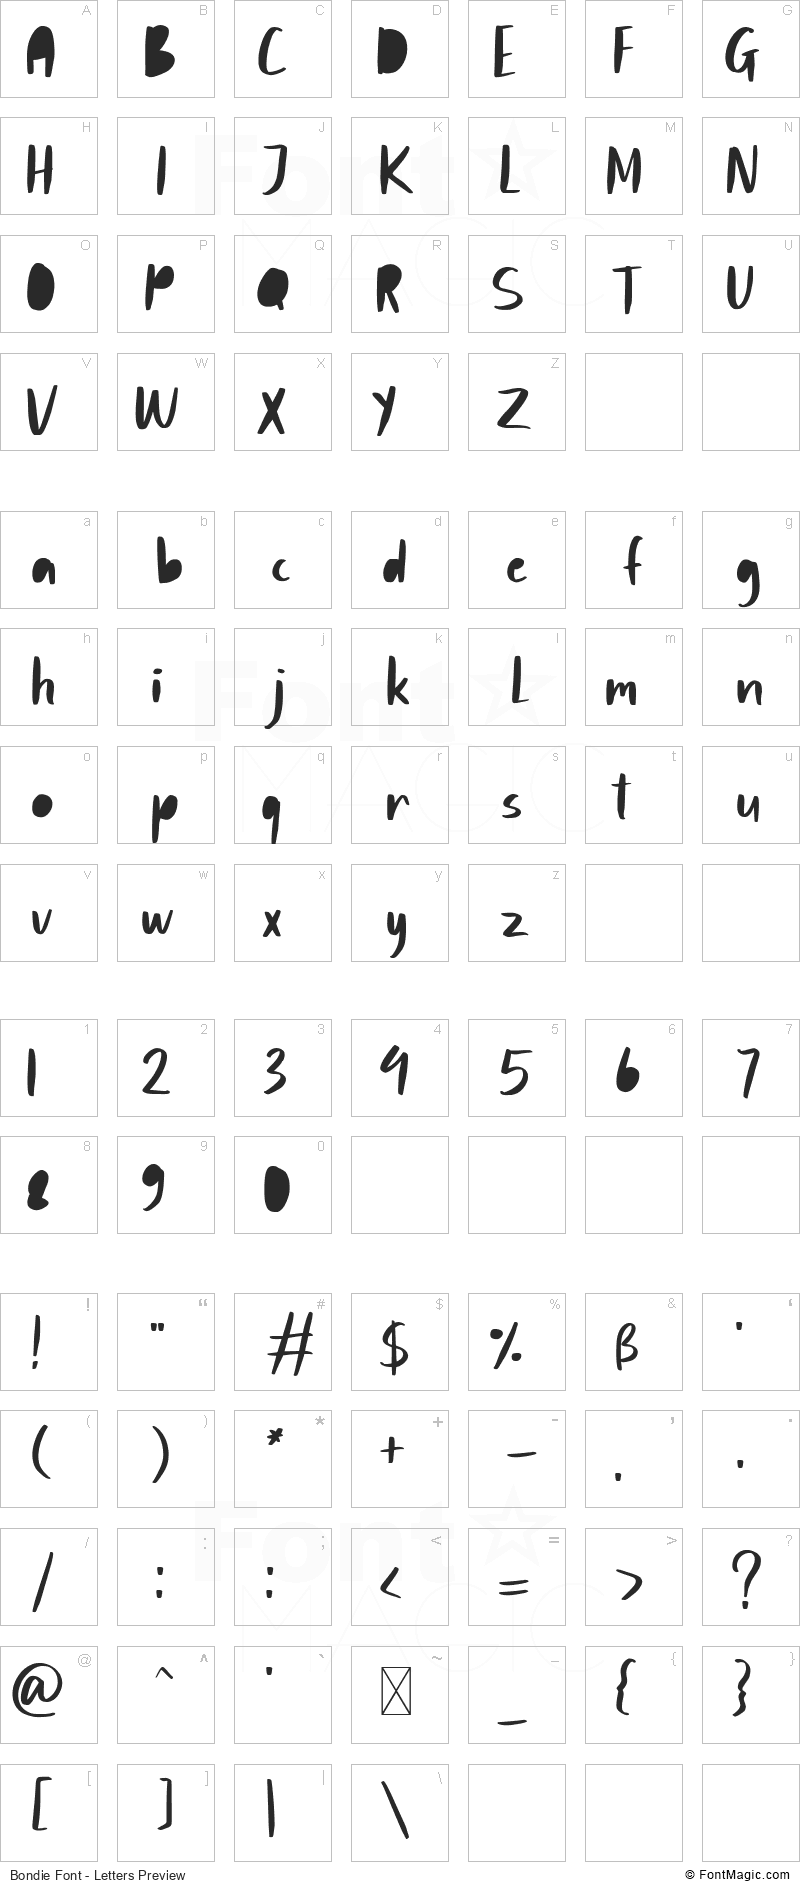 Bondie Font - All Latters Preview Chart